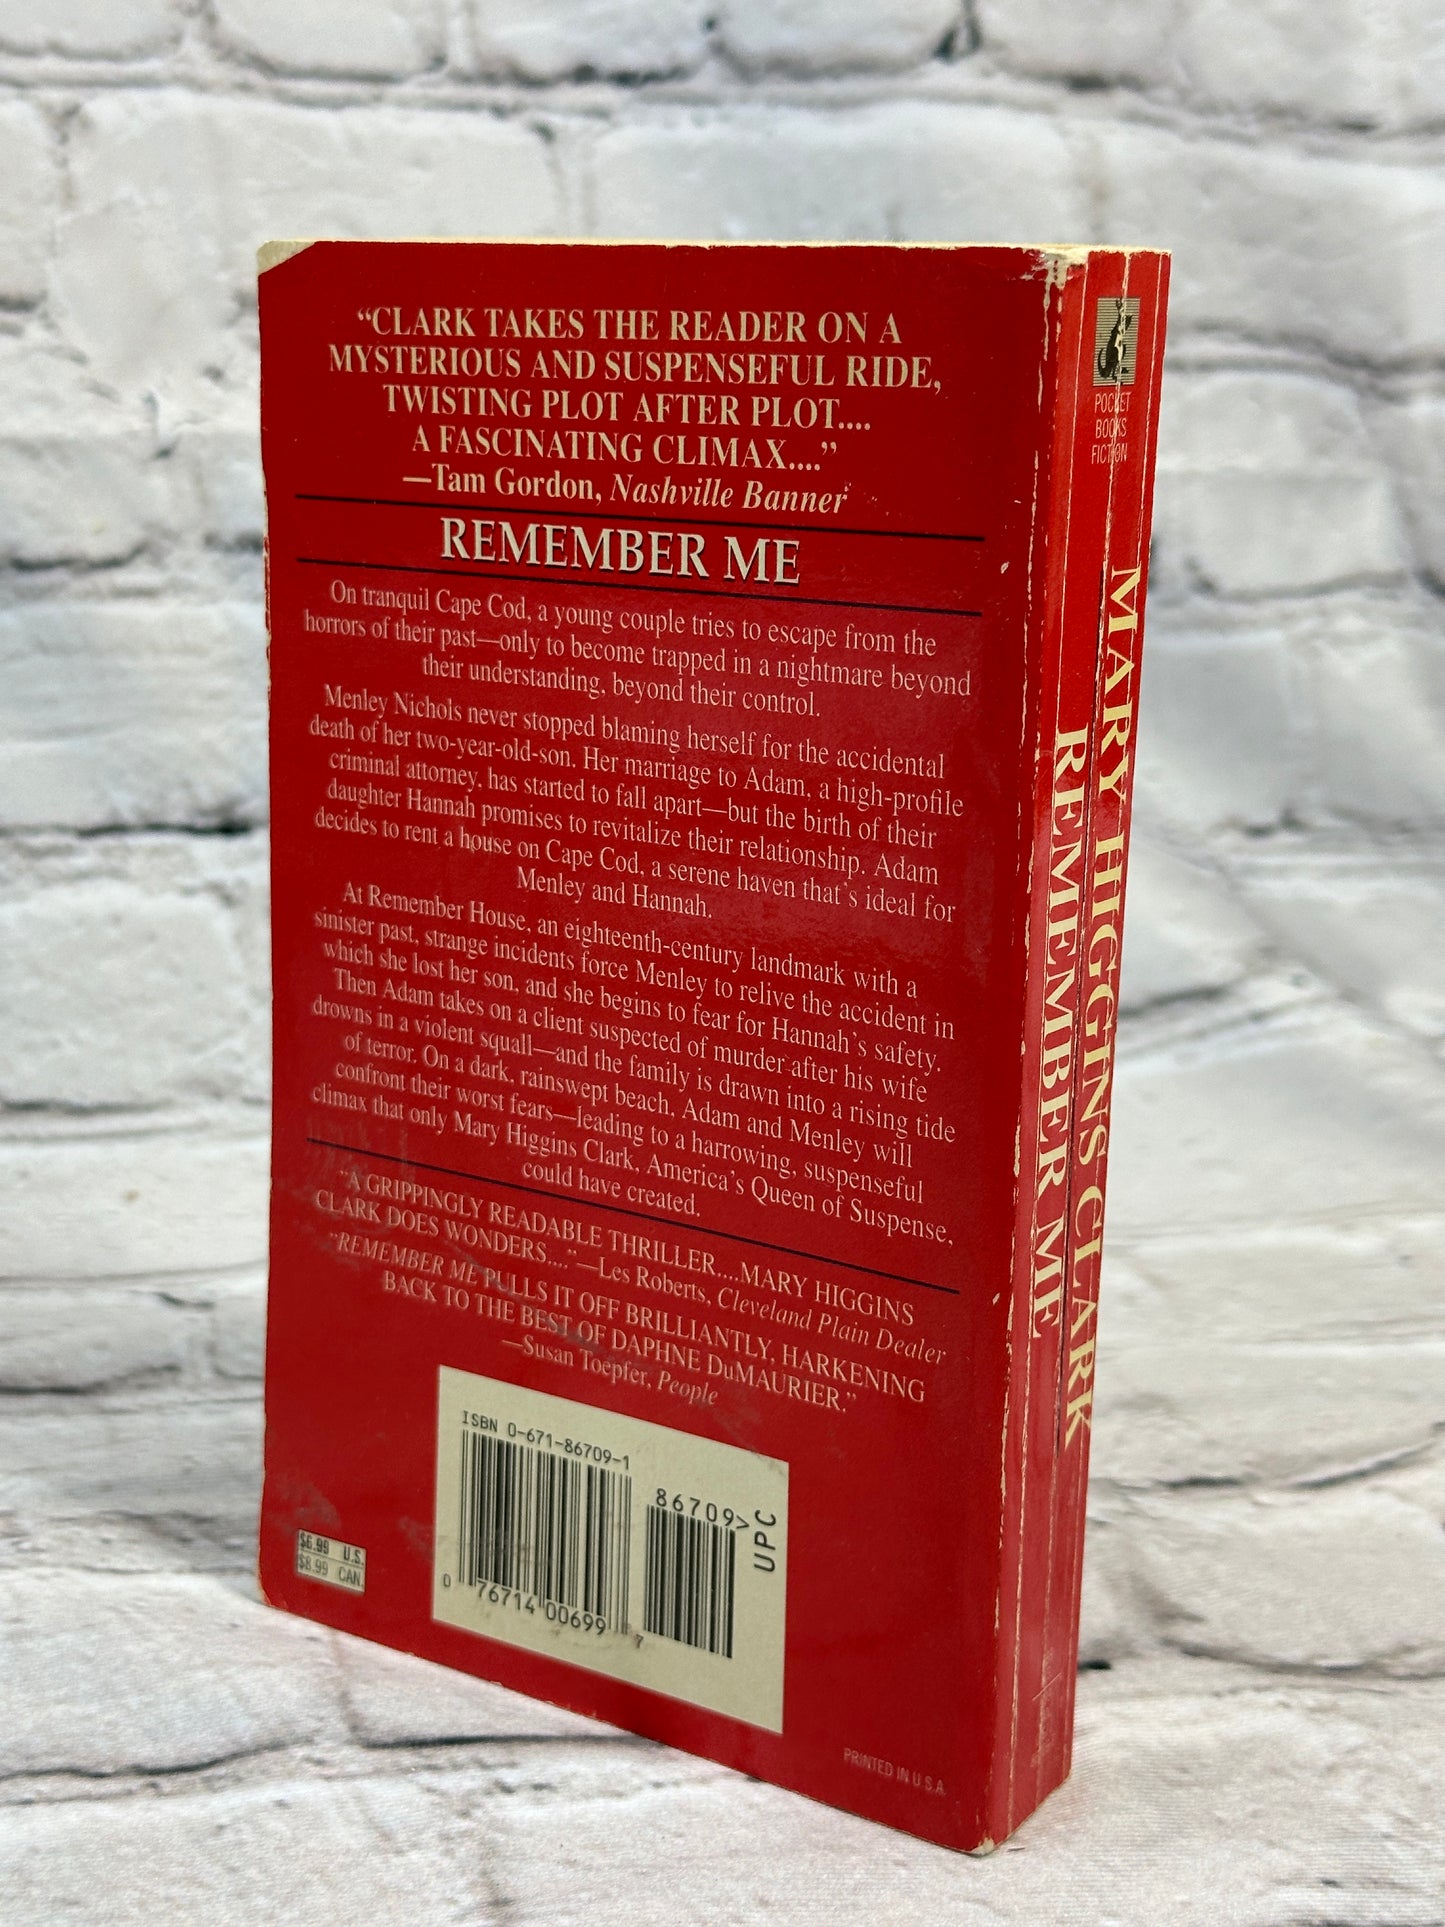 Remember Me by Clark by Mary Higgins [1995]